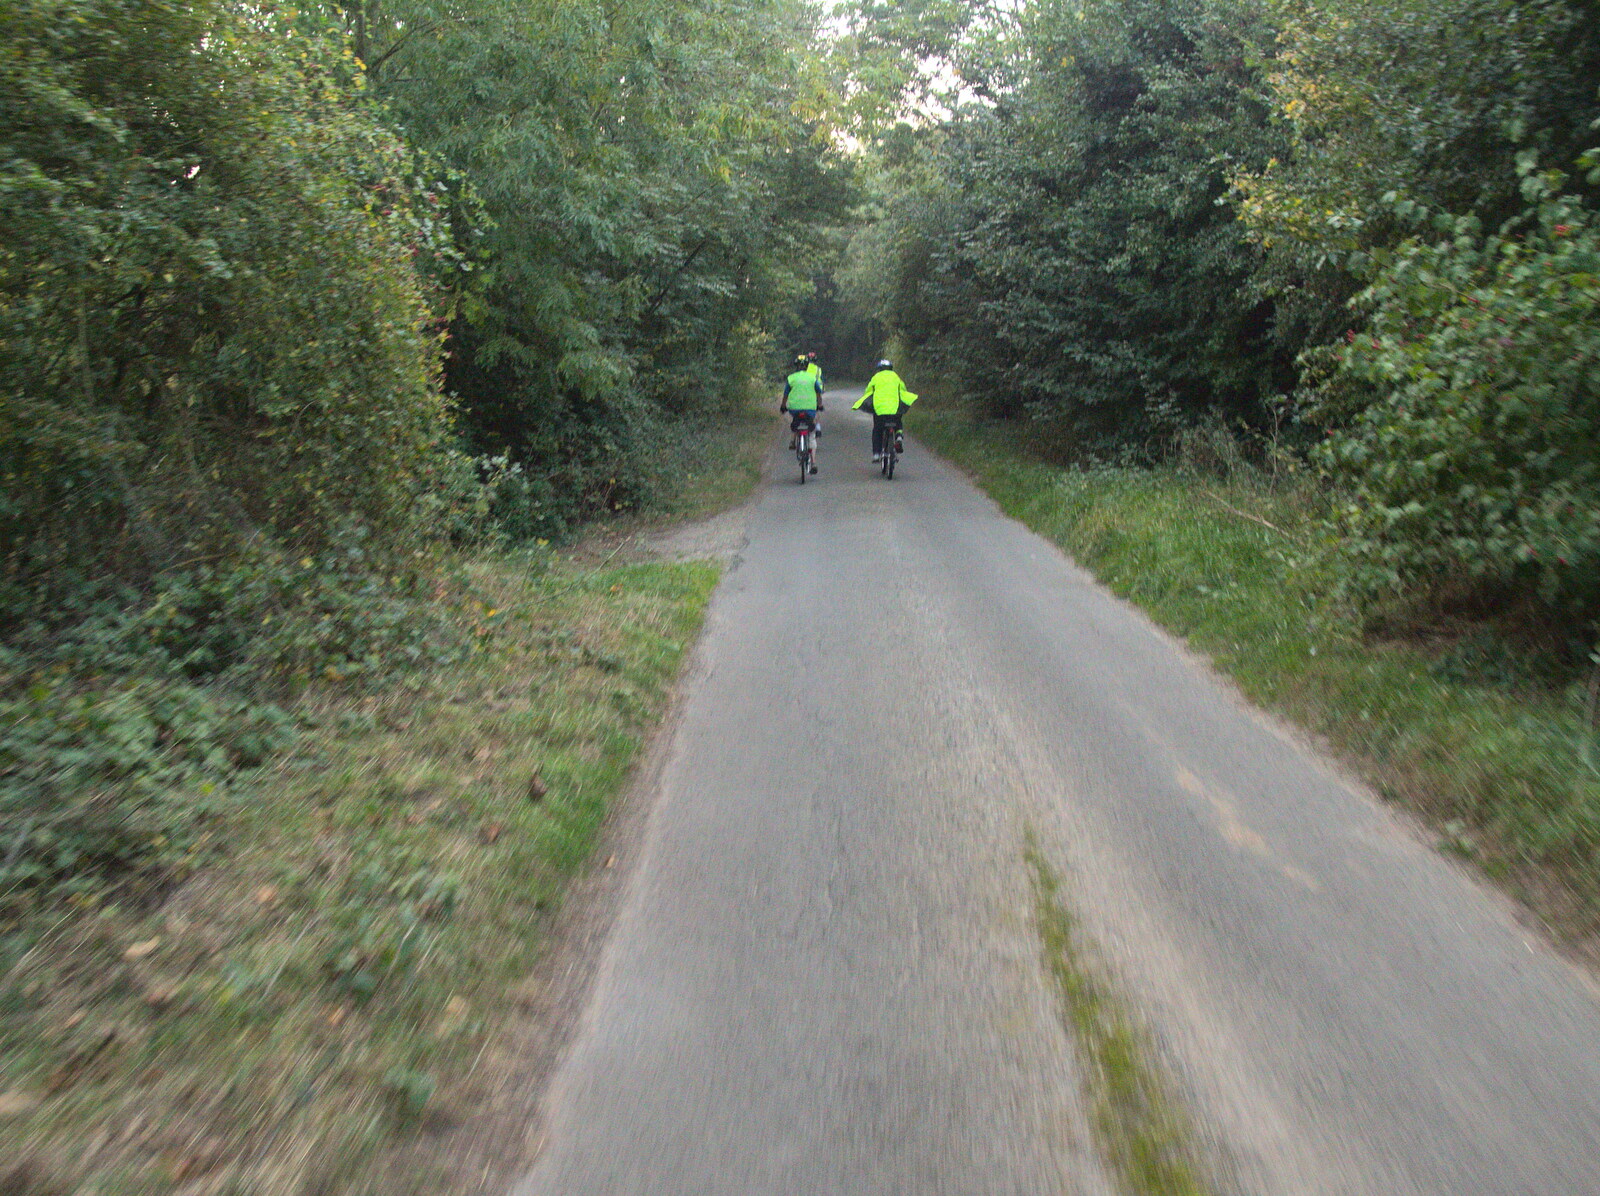 The Sagas head off to Thrandeston from Bike Rides and the BSCC at the Railway, Mellis and Brome, Suffolk - 18th September 2014